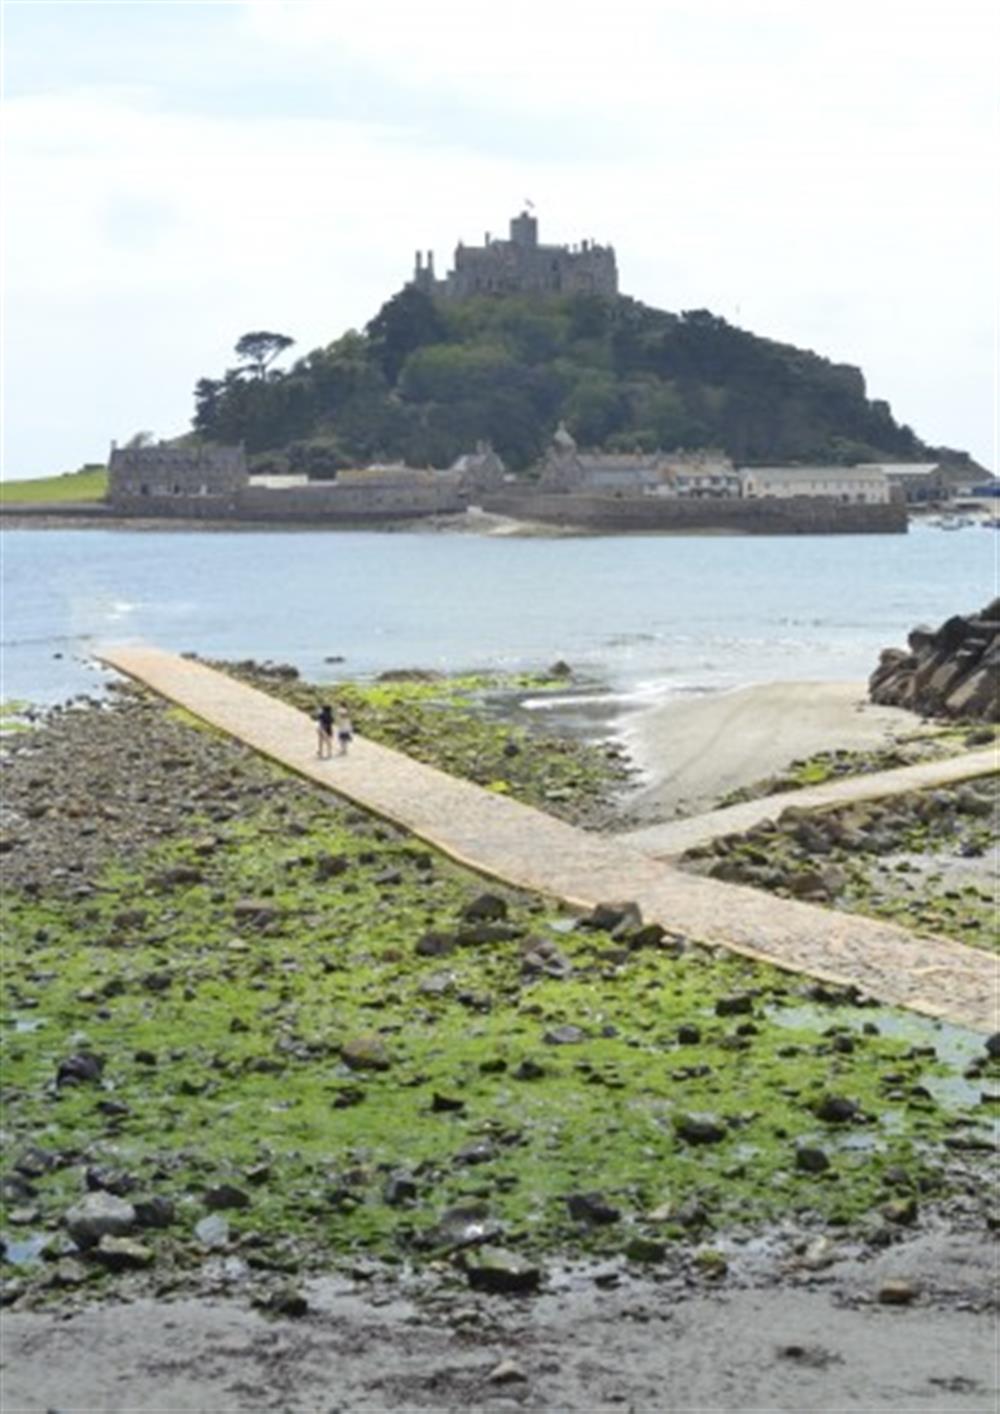 St Michaels Mount is less than an hour away.